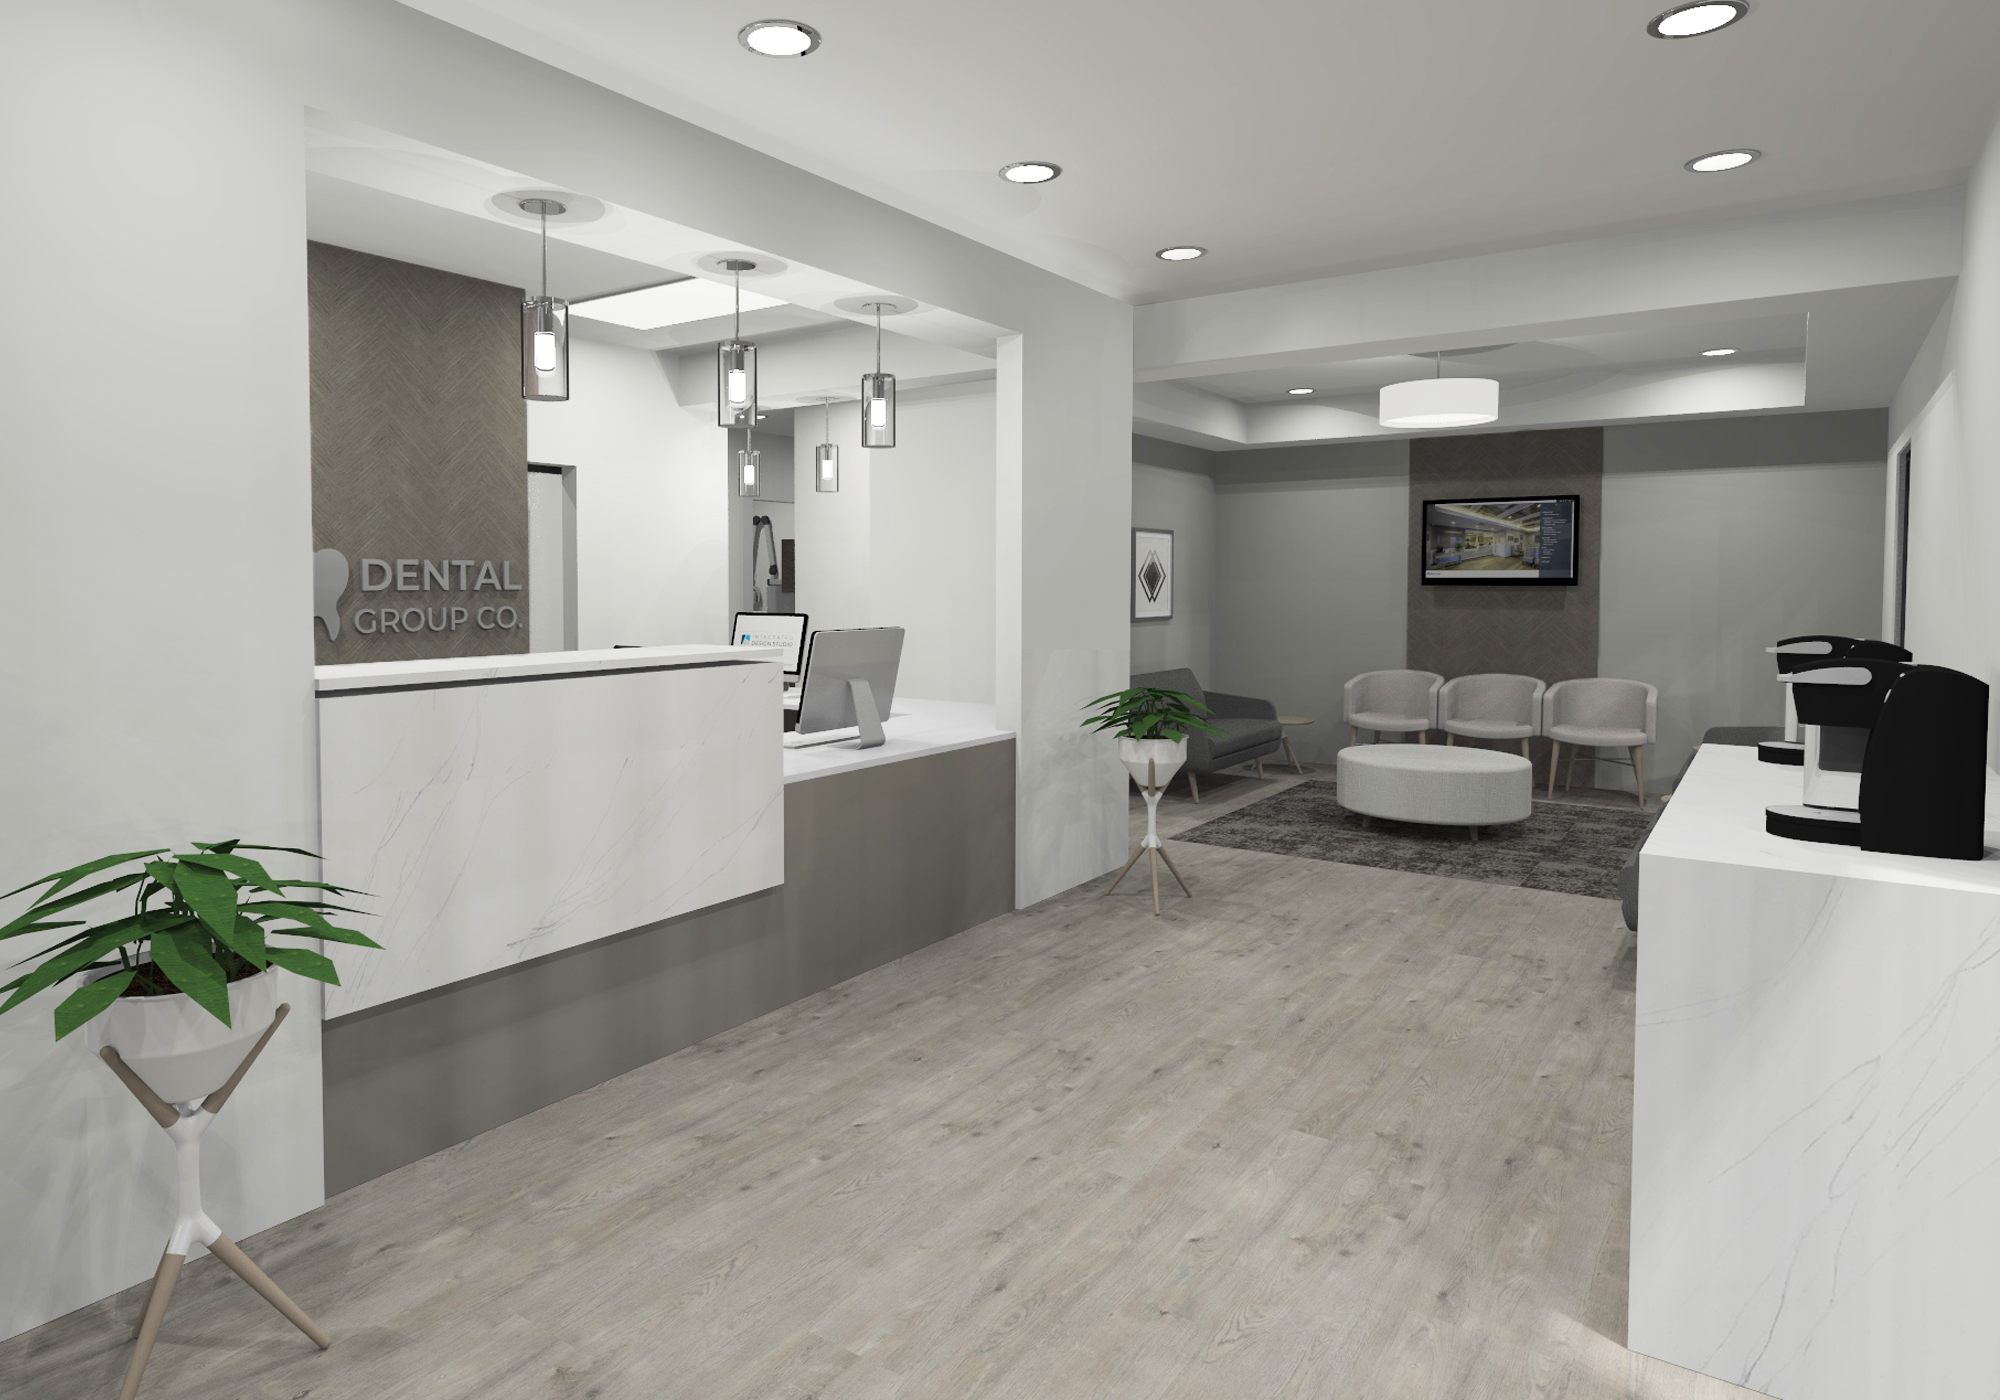 Rendering of reception desk and shared waiting room between the doctors' wings